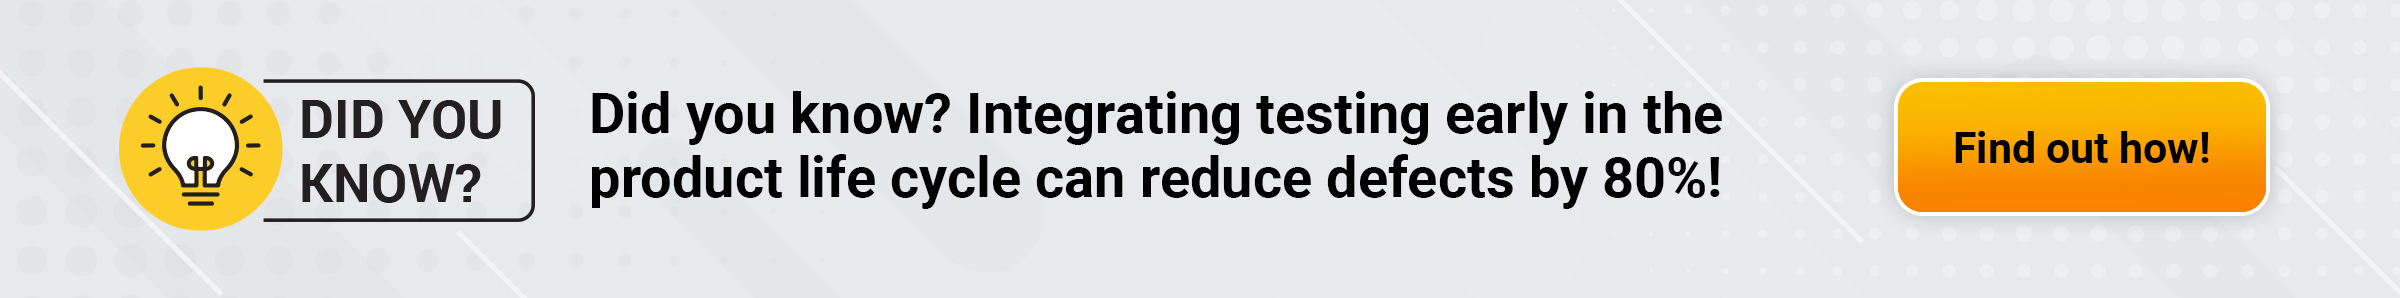 Integrating testing early in the product life cycle can reduce defects by 80%!